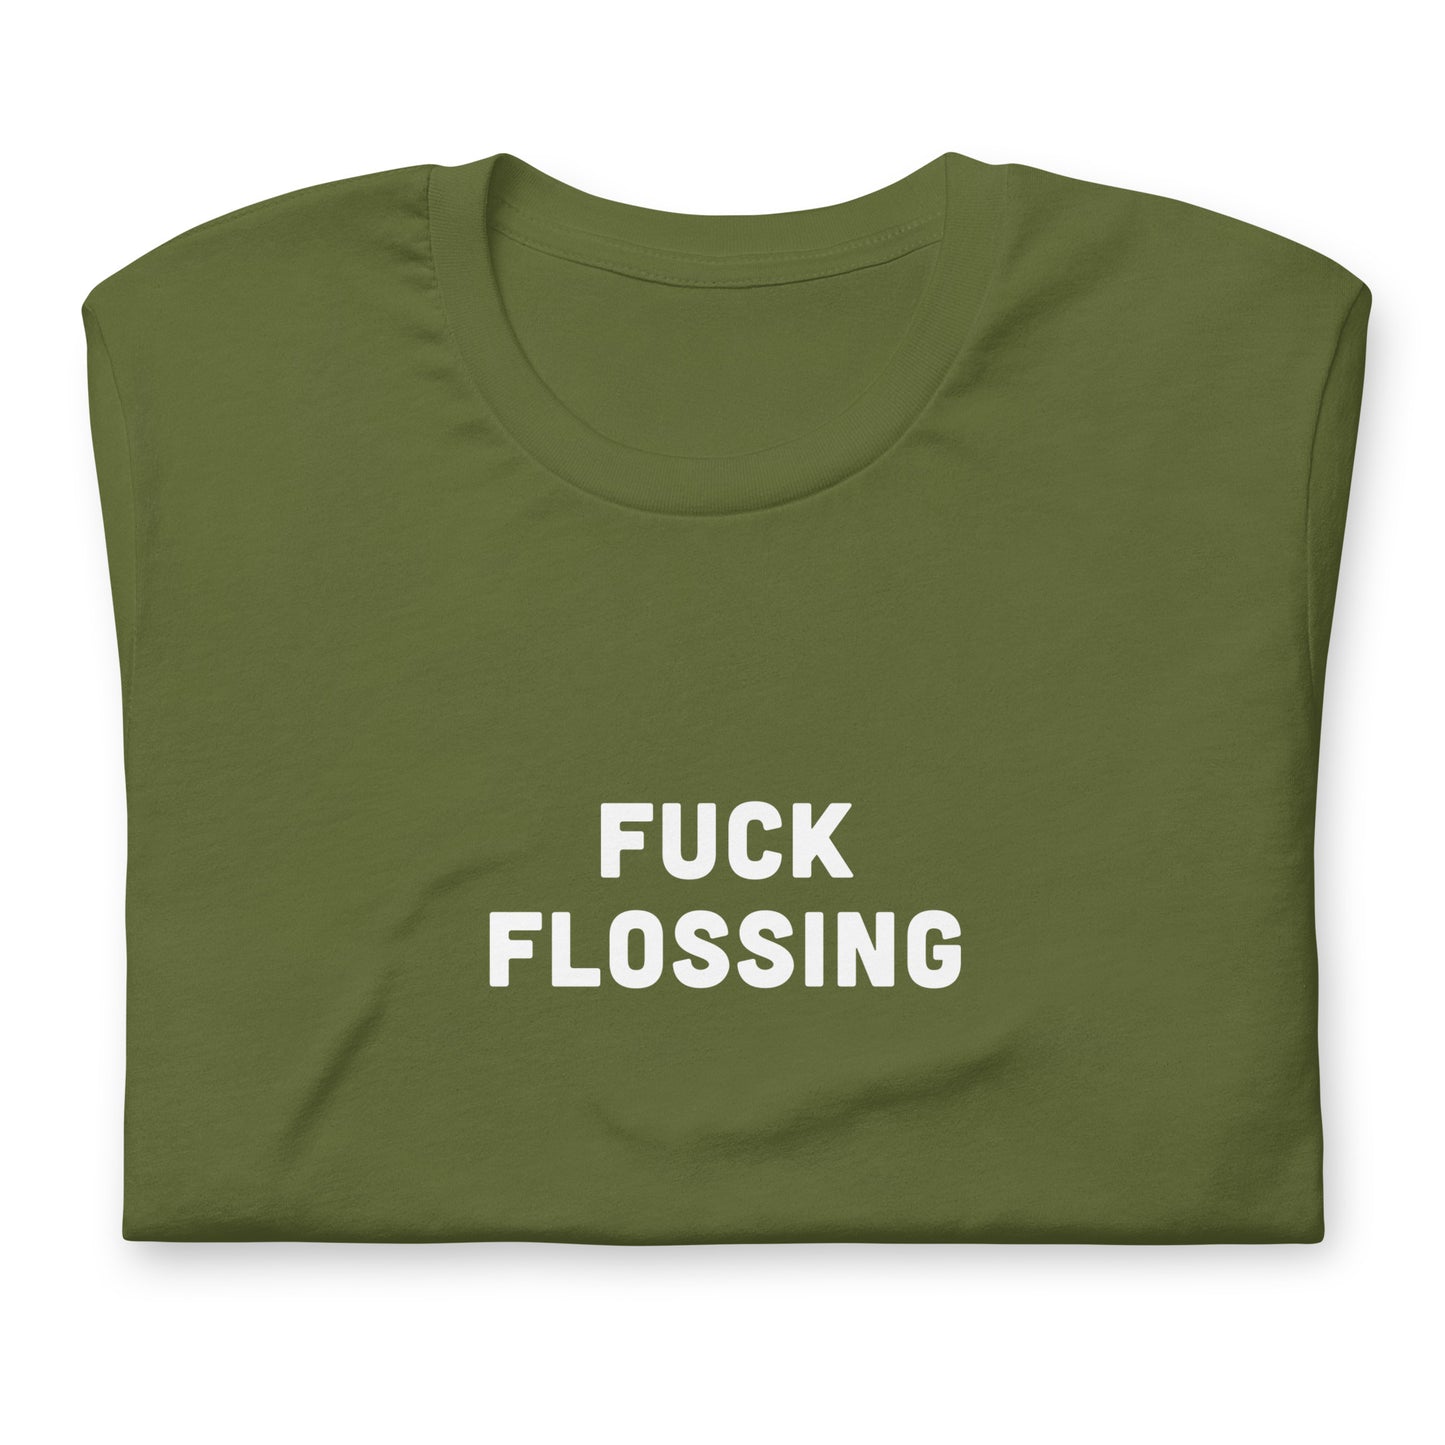 Fuck Flossing T-Shirt Size S Color Navy